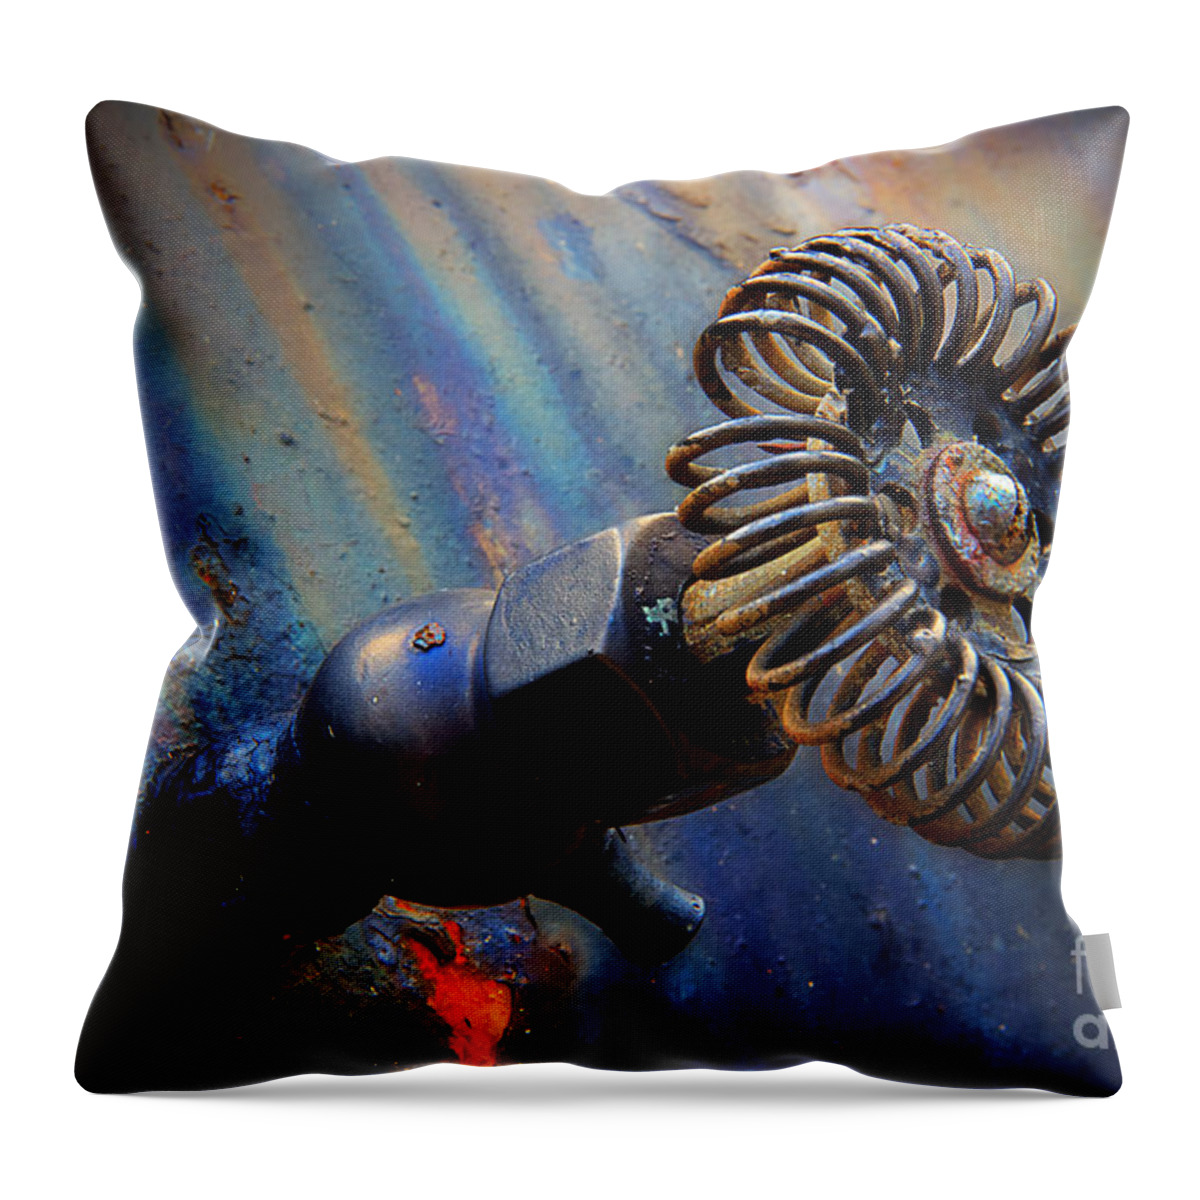 Steam Valve Shutoff Throw Pillow featuring the photograph On Or Off by Michael Eingle